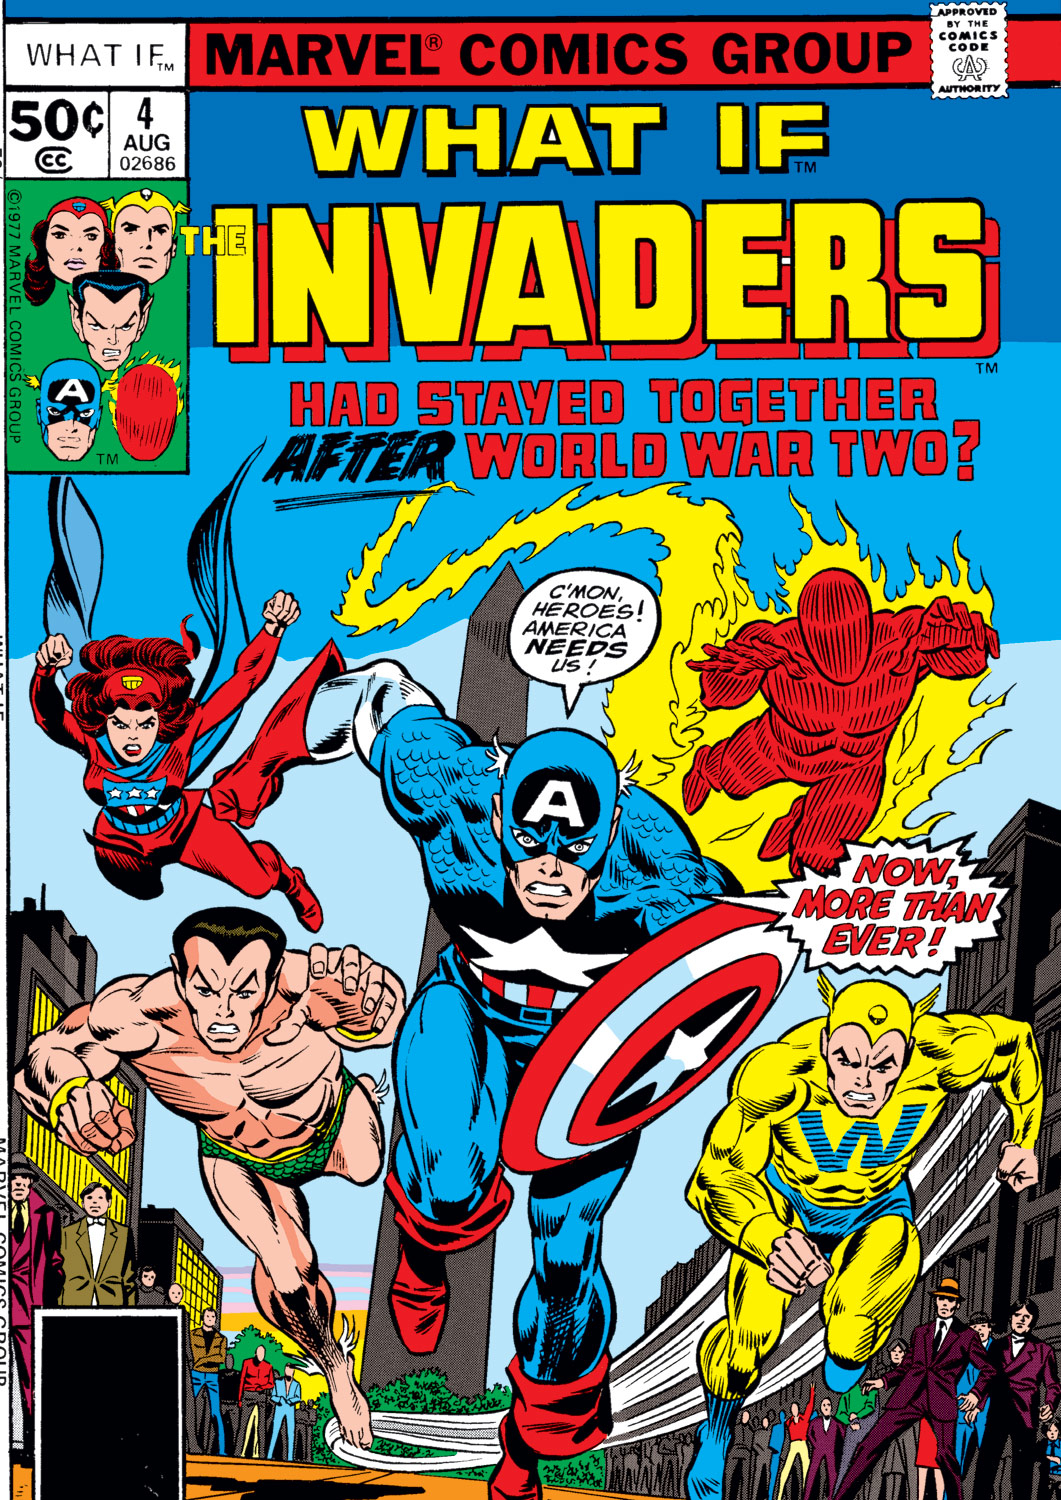 <{ $series->title }} issue 4 - The Invaders had stayed together after World War Two - Page 1